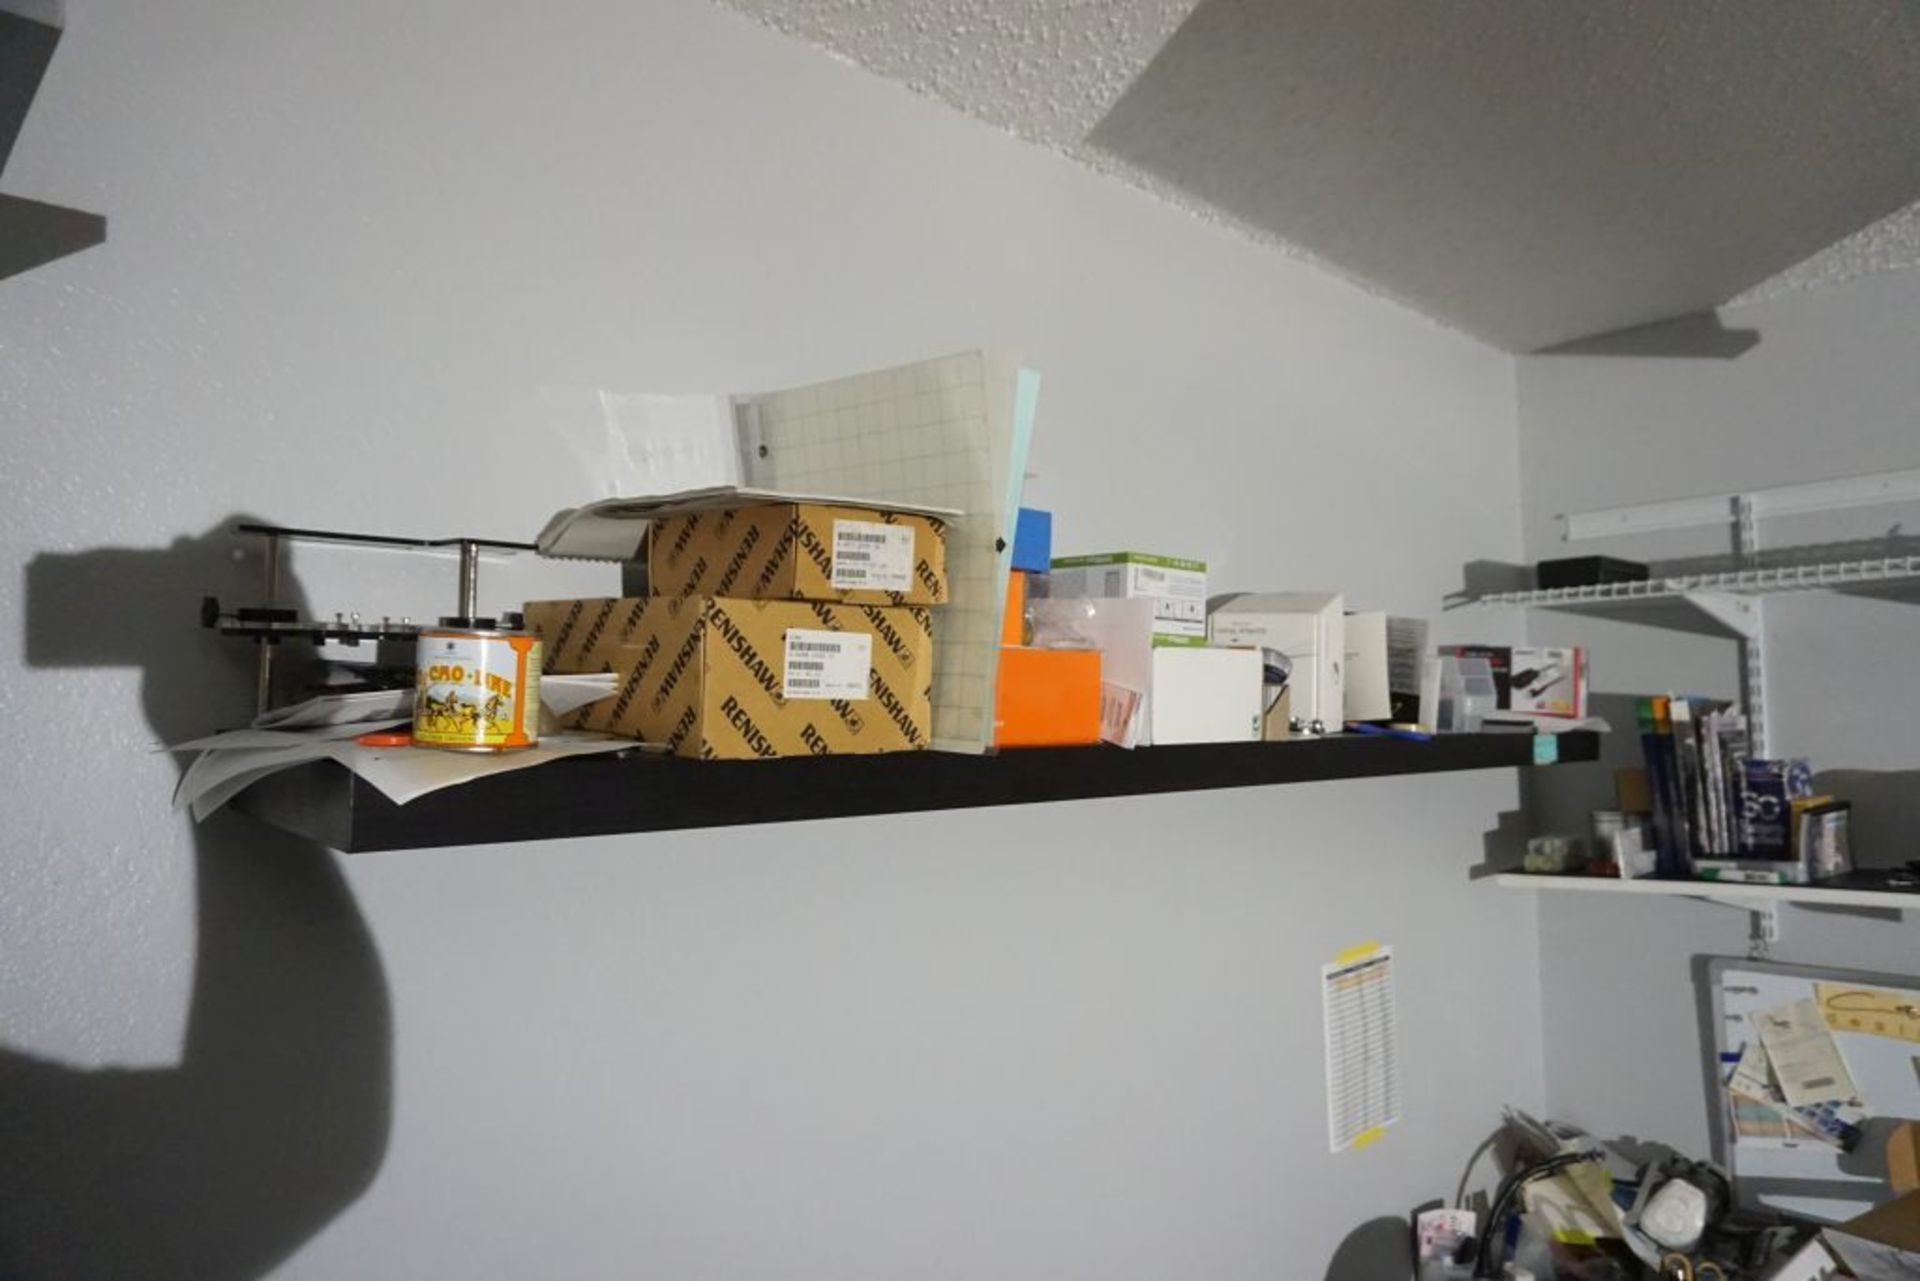 Lot of Room Contents|Includes: Workbench, Routers, Cabinets, Tripod, Office Supplies; Tag: 221190 - Image 6 of 16